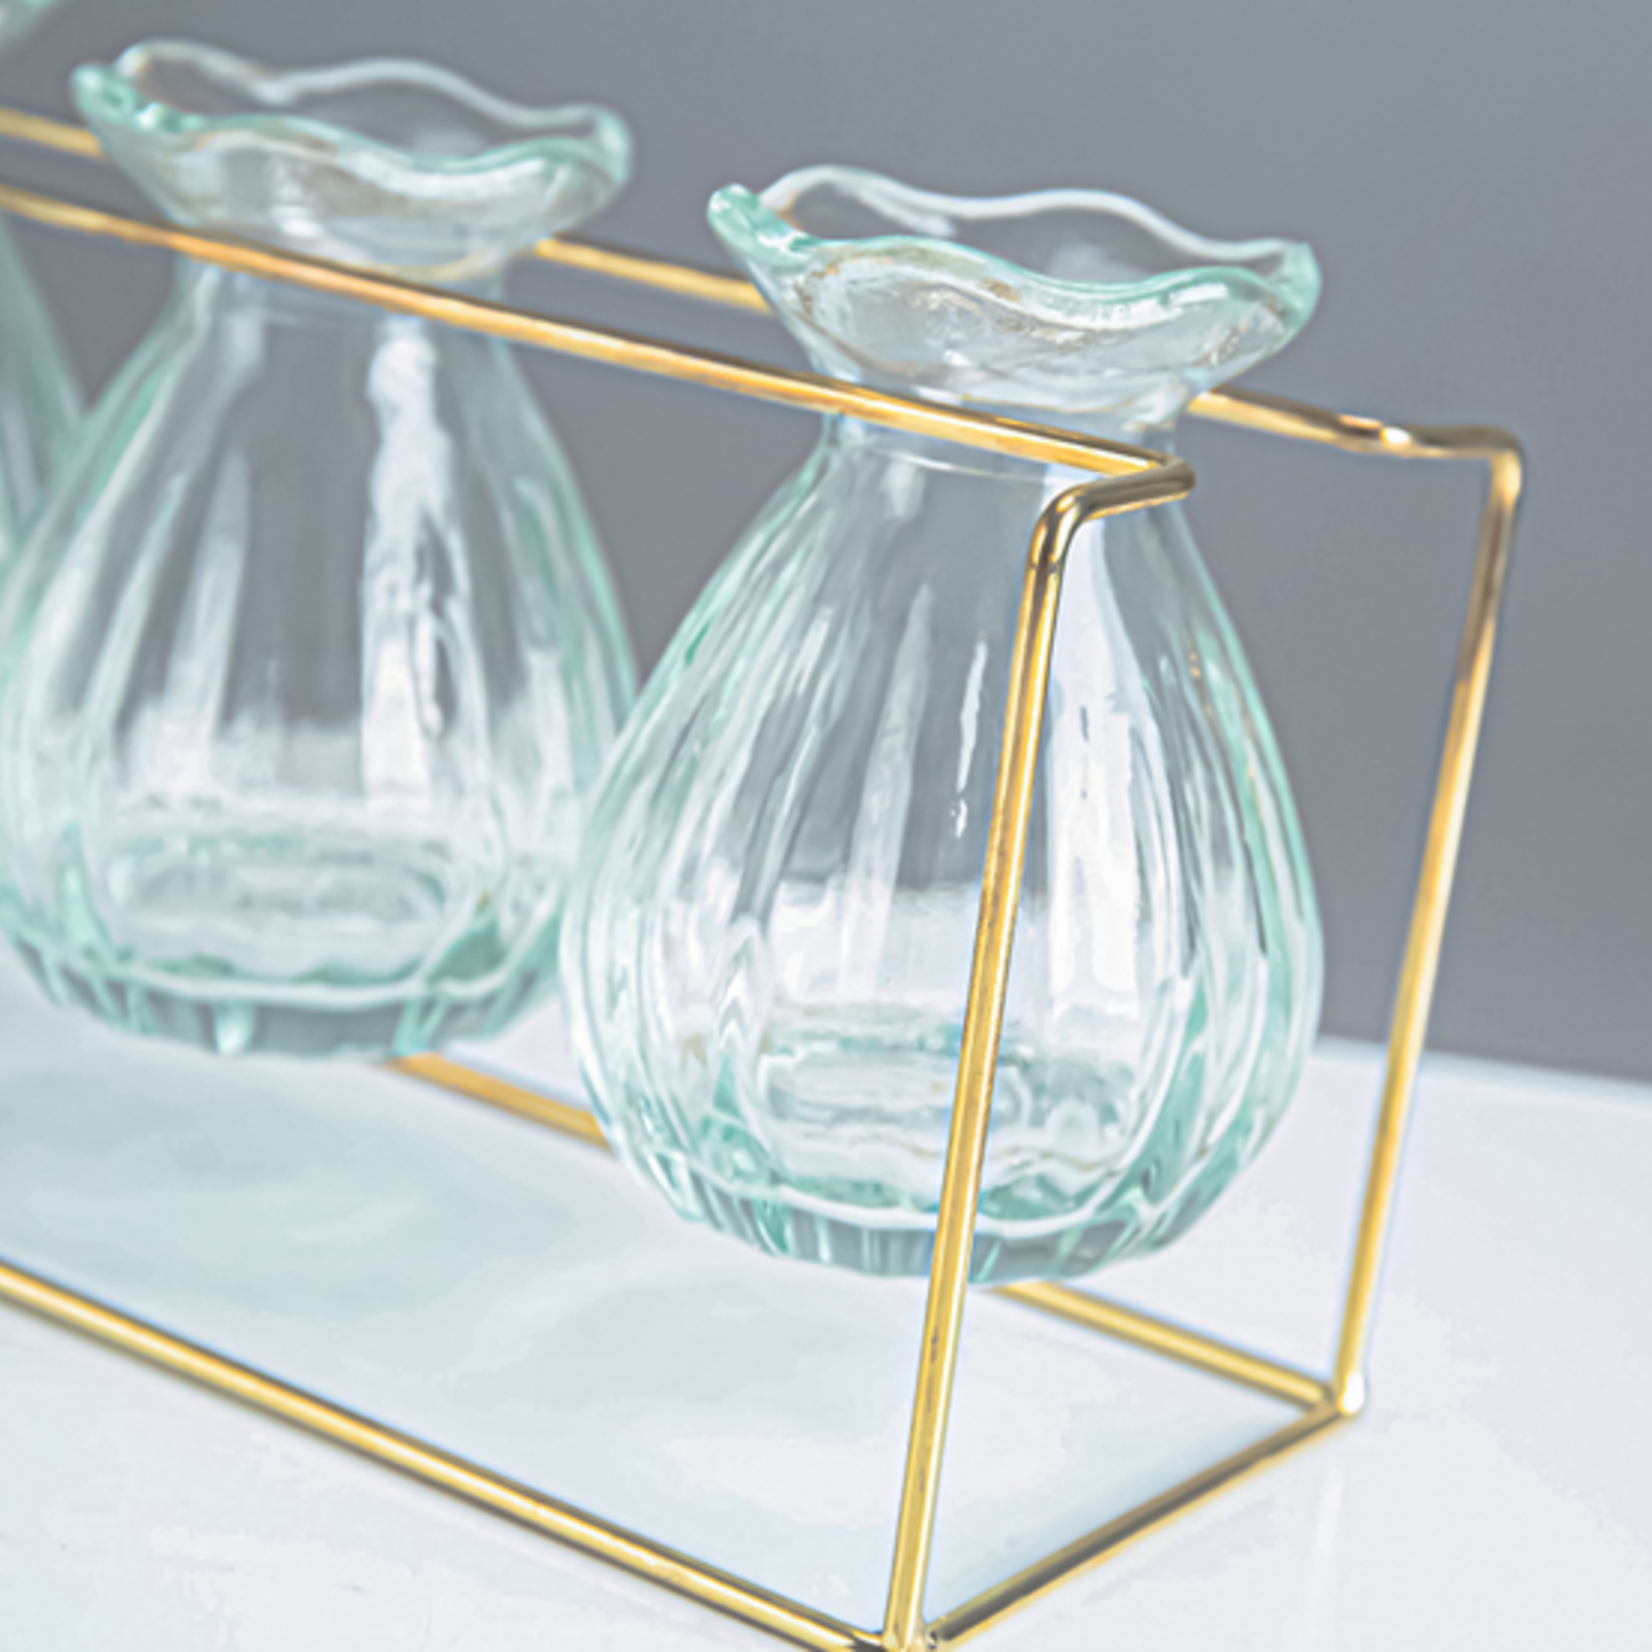 4.5”H X 8.75“L X 3.25” THREE(3) GLASS BUD VASES WITH GOLD STAND